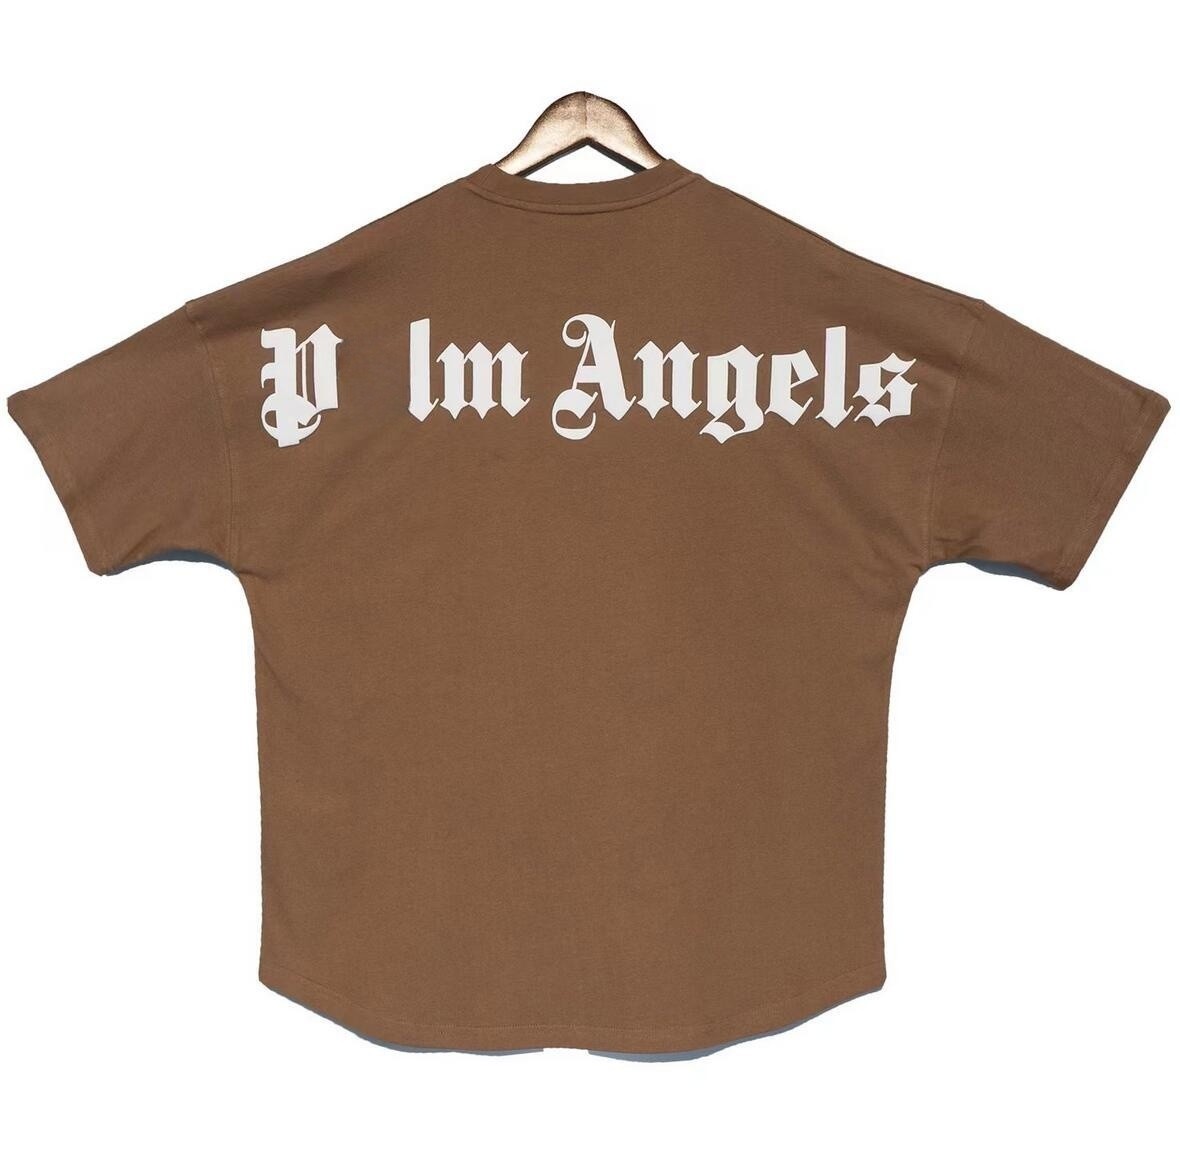 

Summer Tees Plam Mens T-Shirts Women Angels Designers Shirts Fashion Tops Mans Casual Cotton Back Letter Shirt Shorts Sleeve Tshirts over sized, Q1111